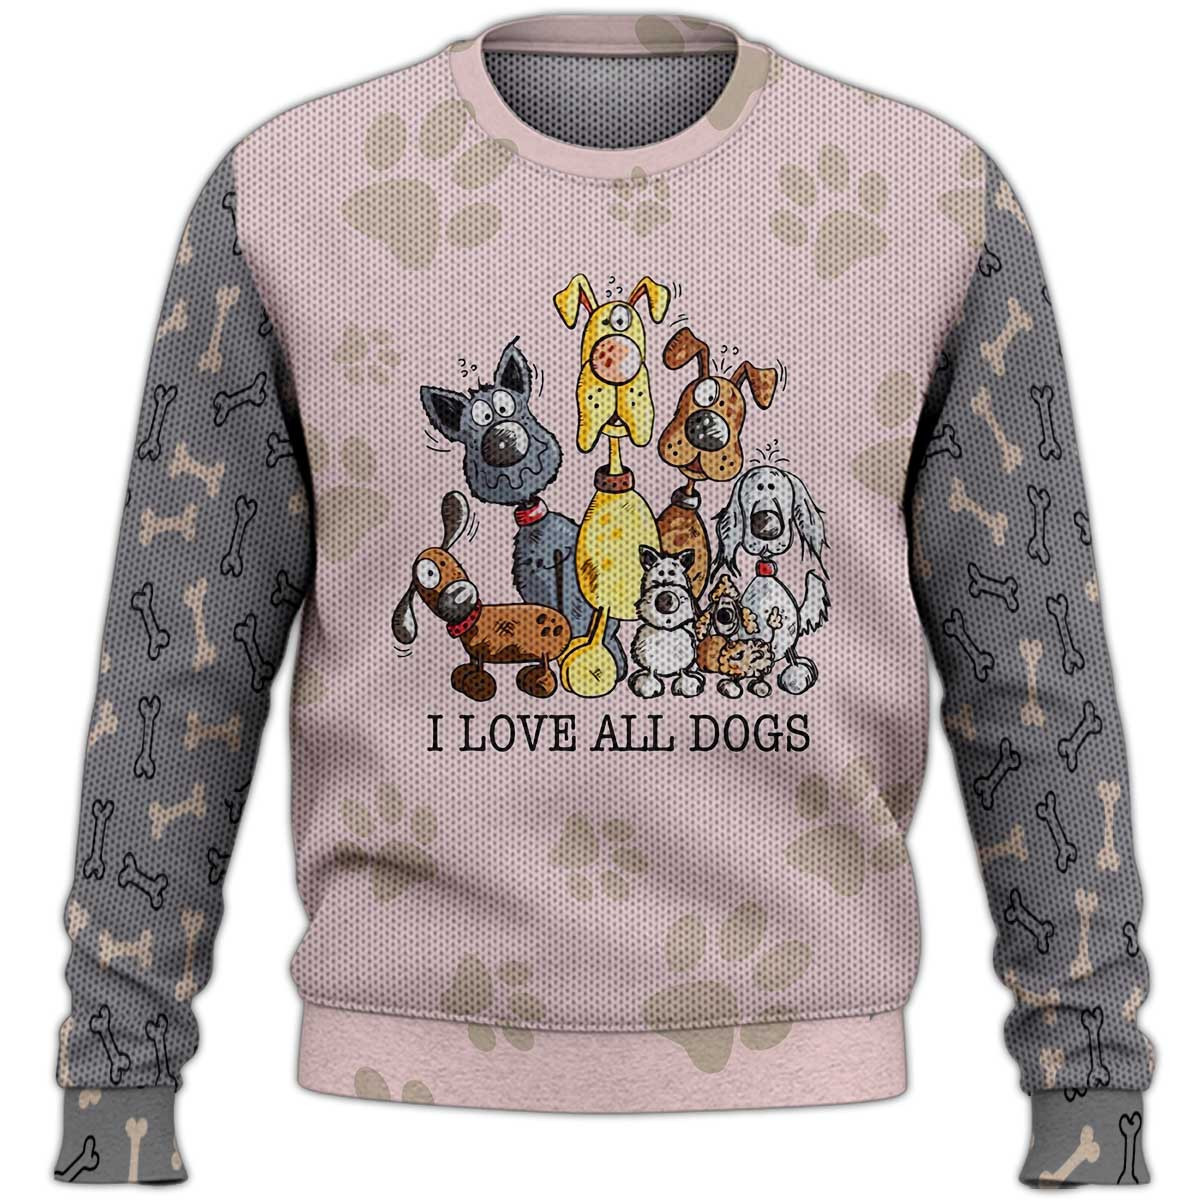 I Love All Dogs Sweater, Dog Sweater For Humans - Top Personalized